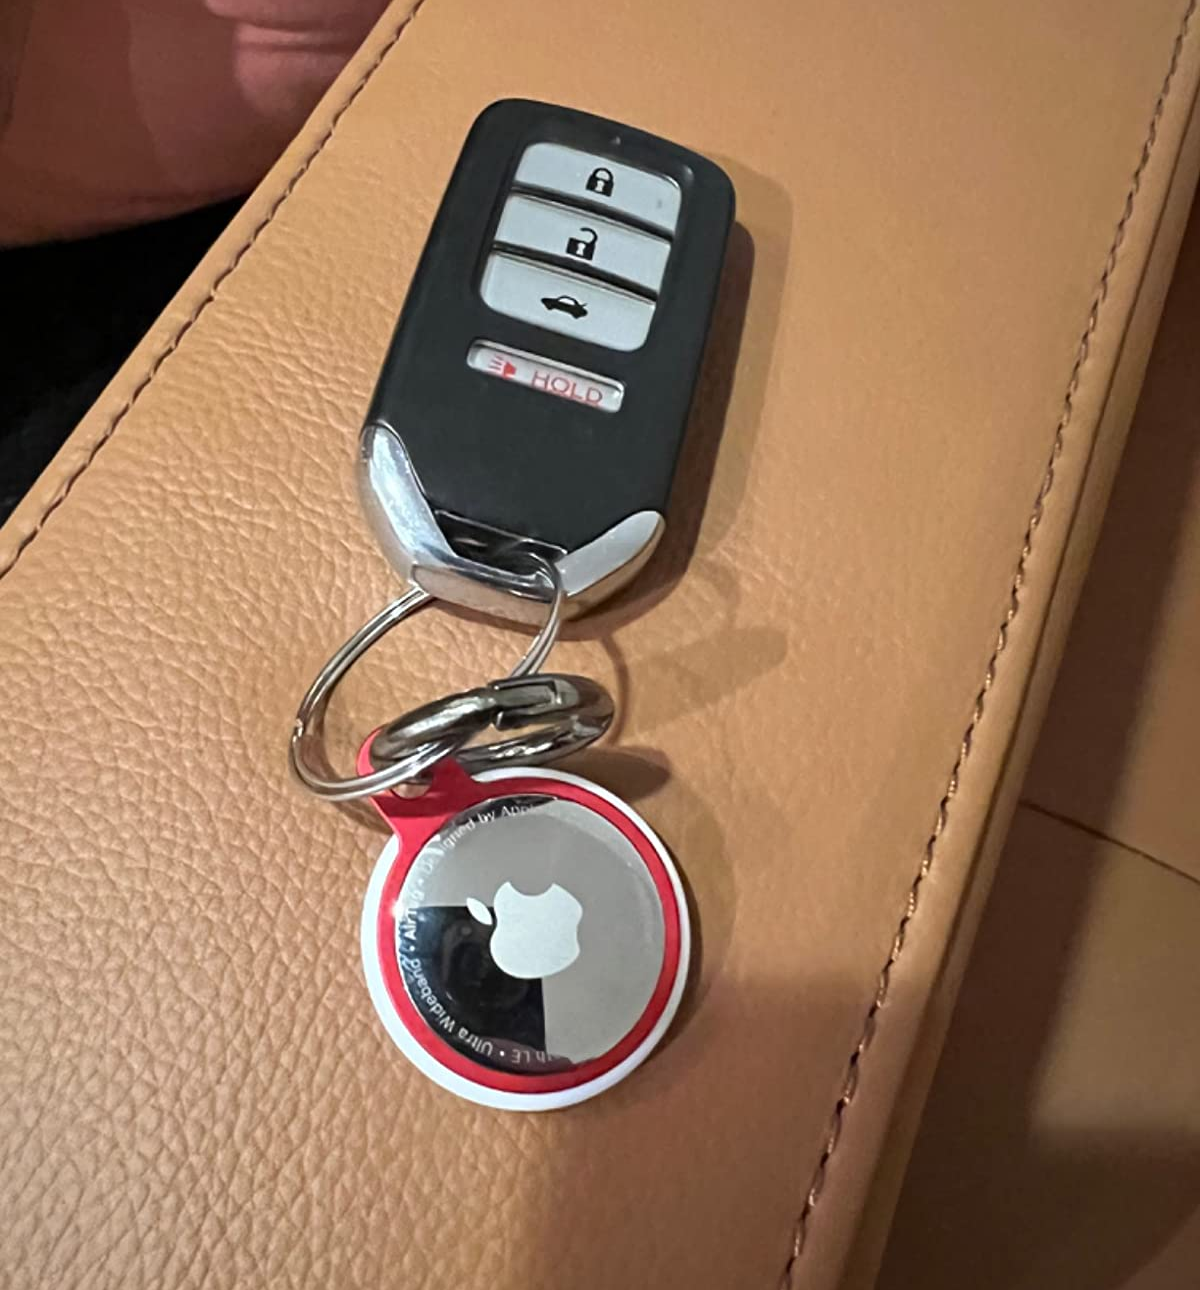 the AirTag attached to a key fob